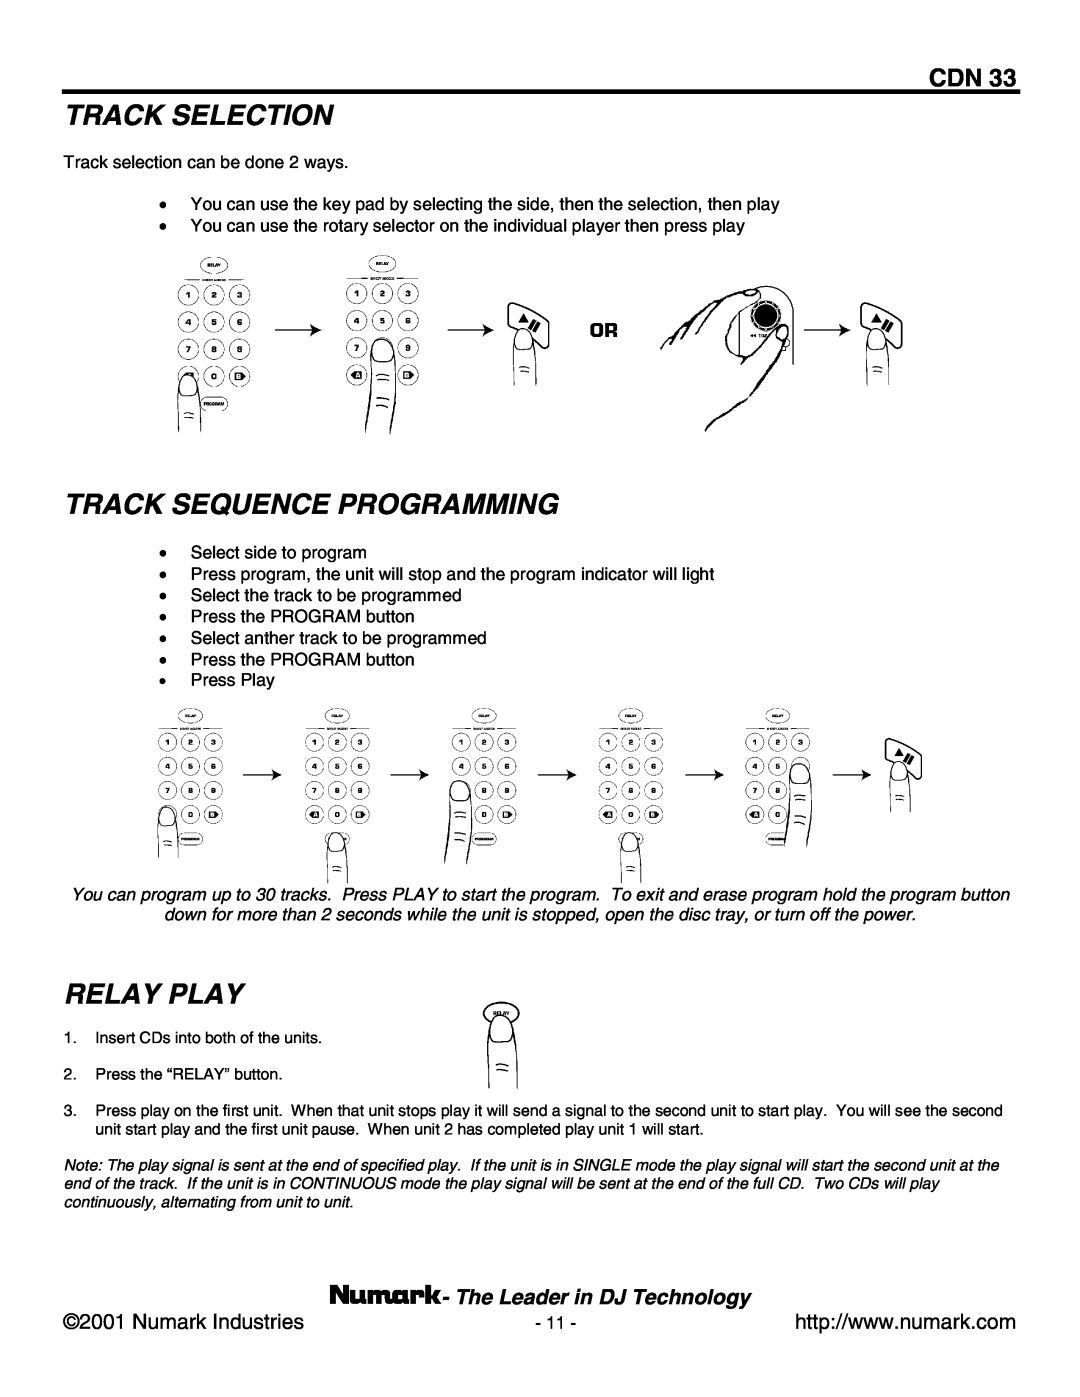 Numark Industries CDN 33 manual Track Selection, Track Sequence Programming, Relay Play, Numark Industries 